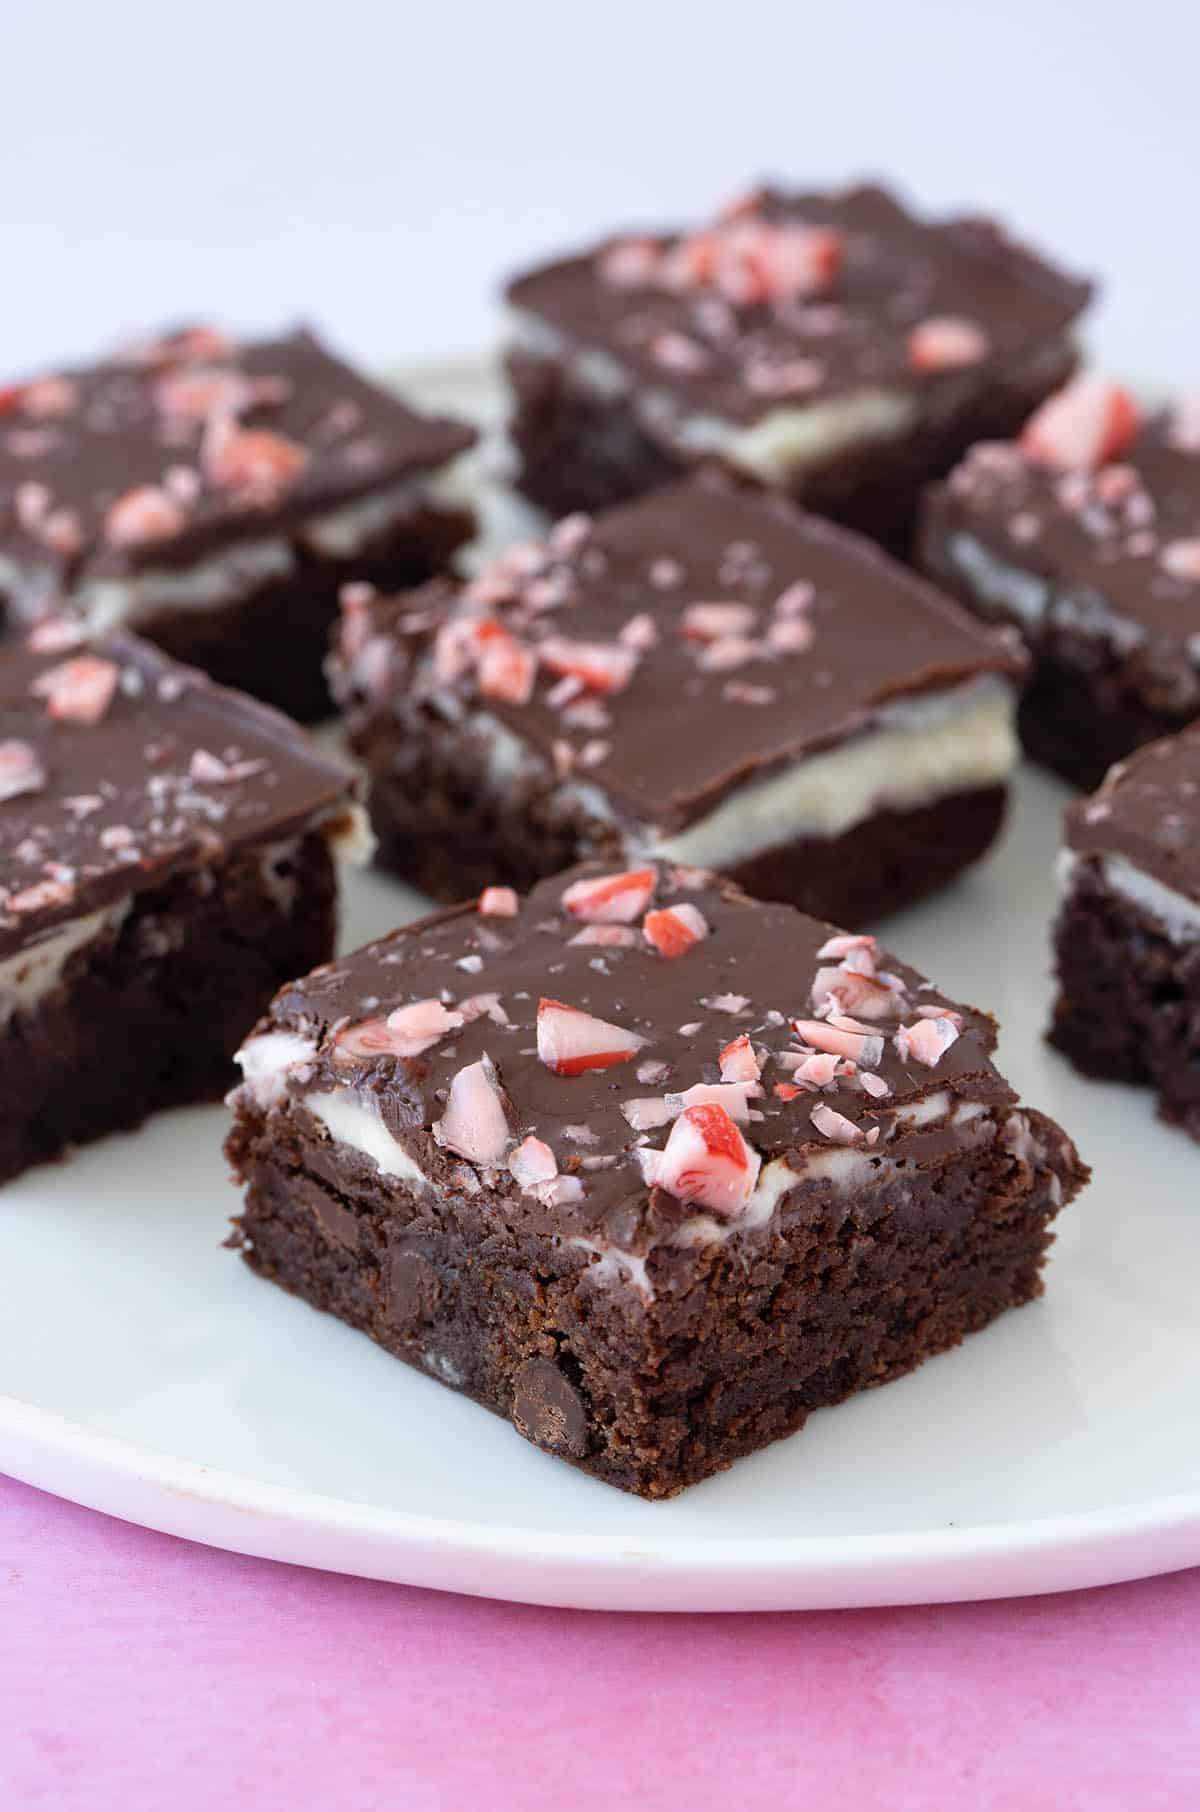 A plate of beautifully decorated Peppermint Brownies